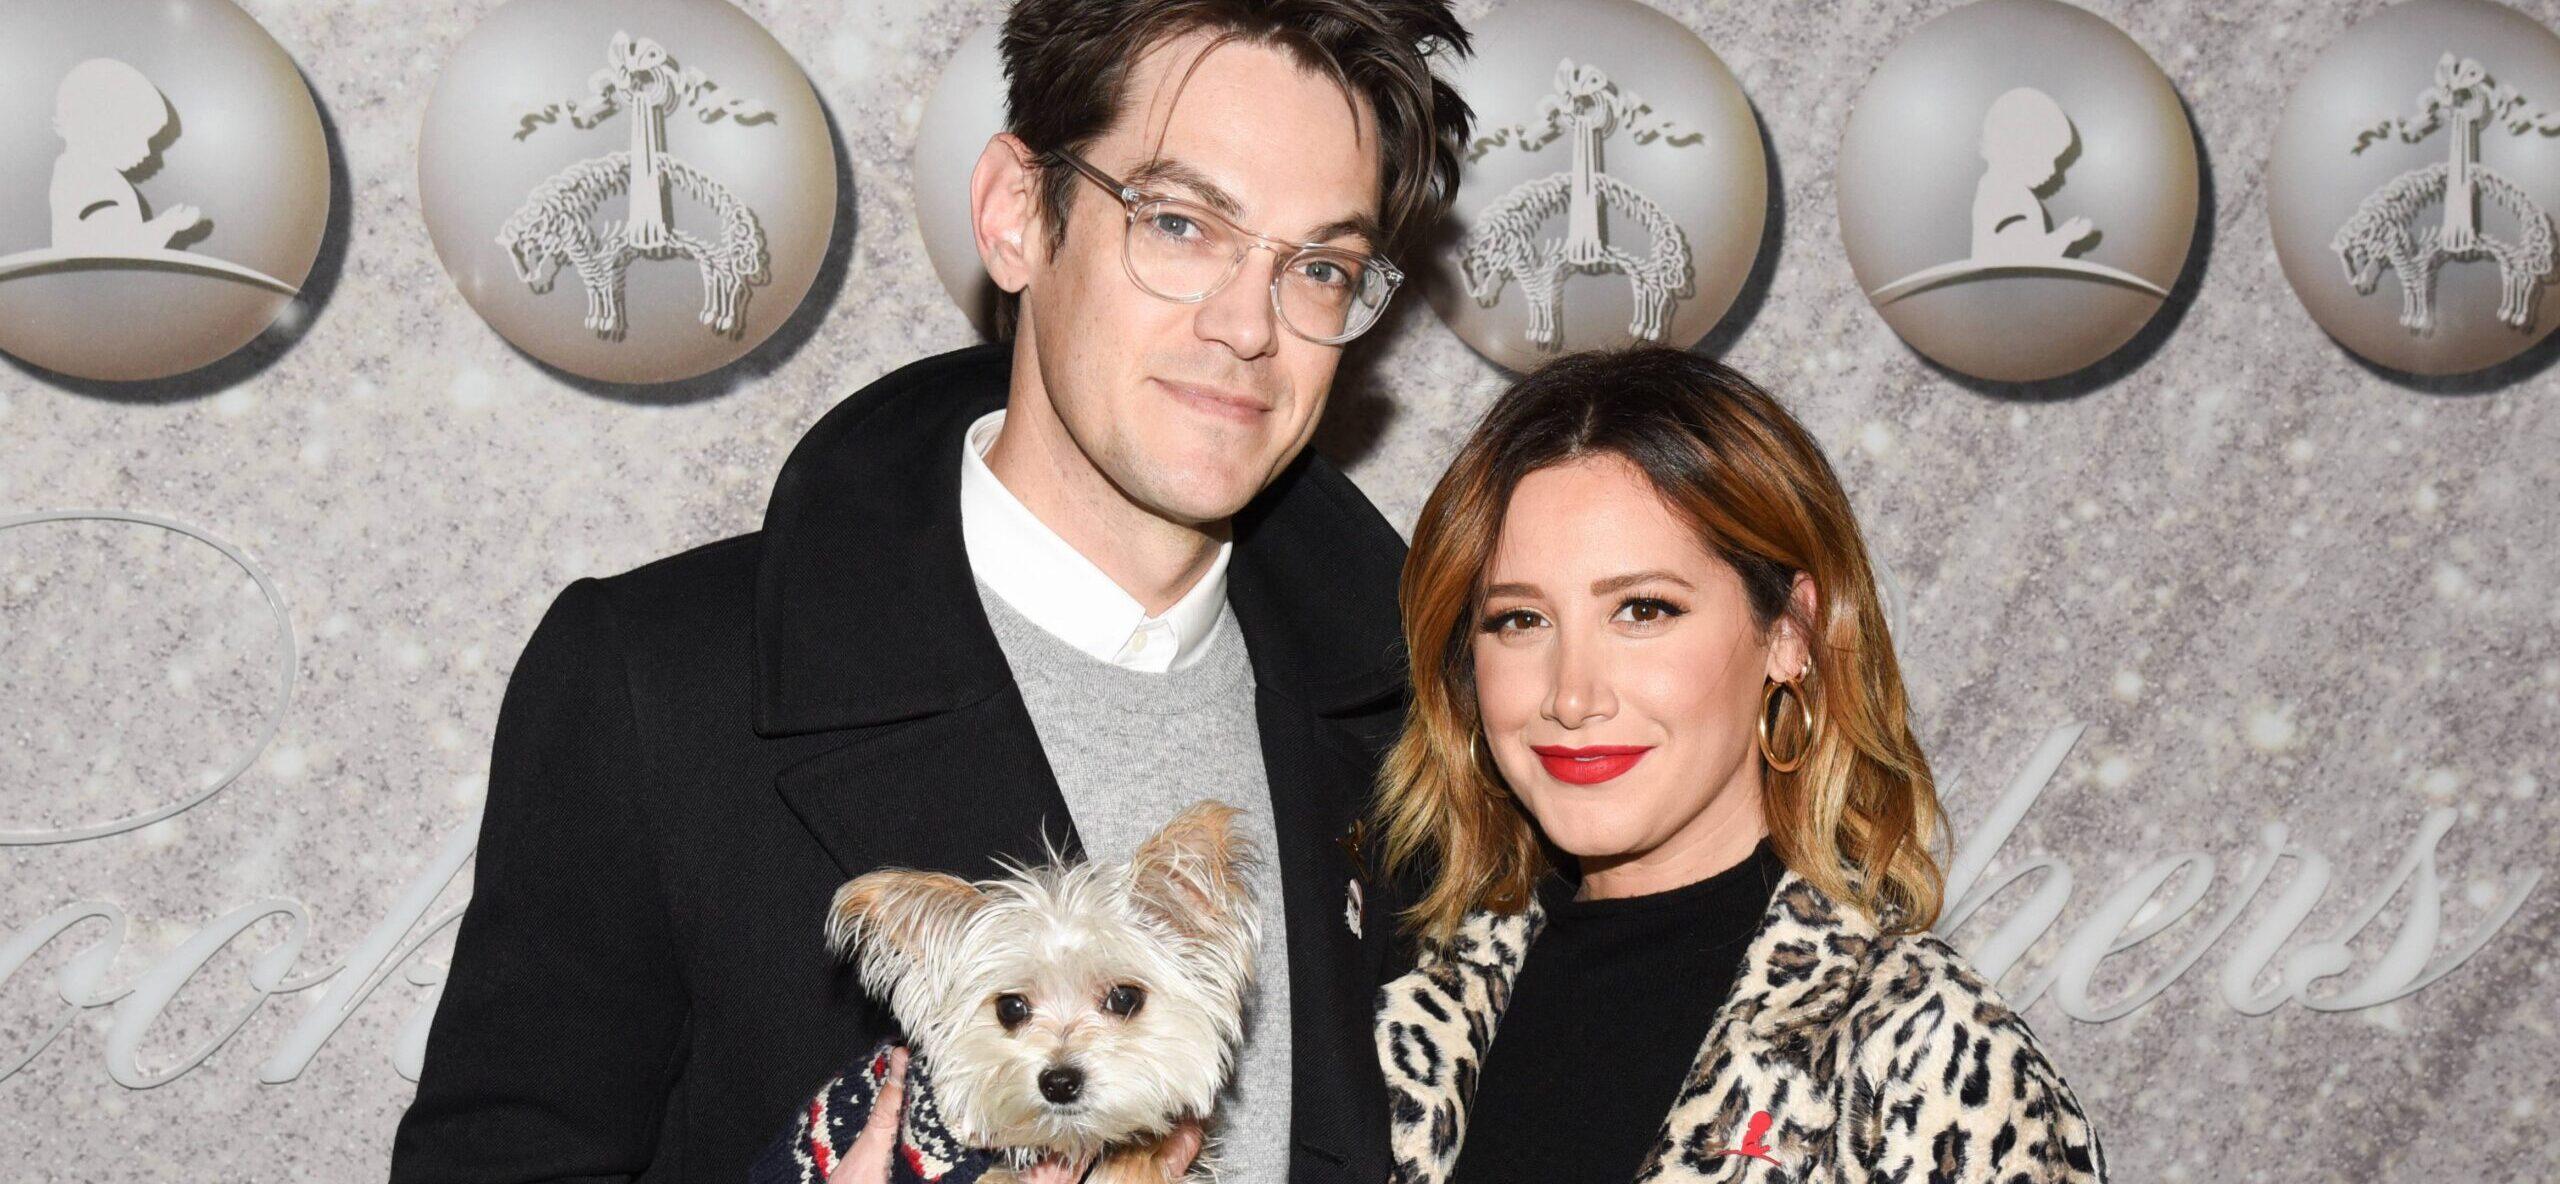 Ashley Tisdale Celebrates 9-Year Anniversary With Sweet IG Post